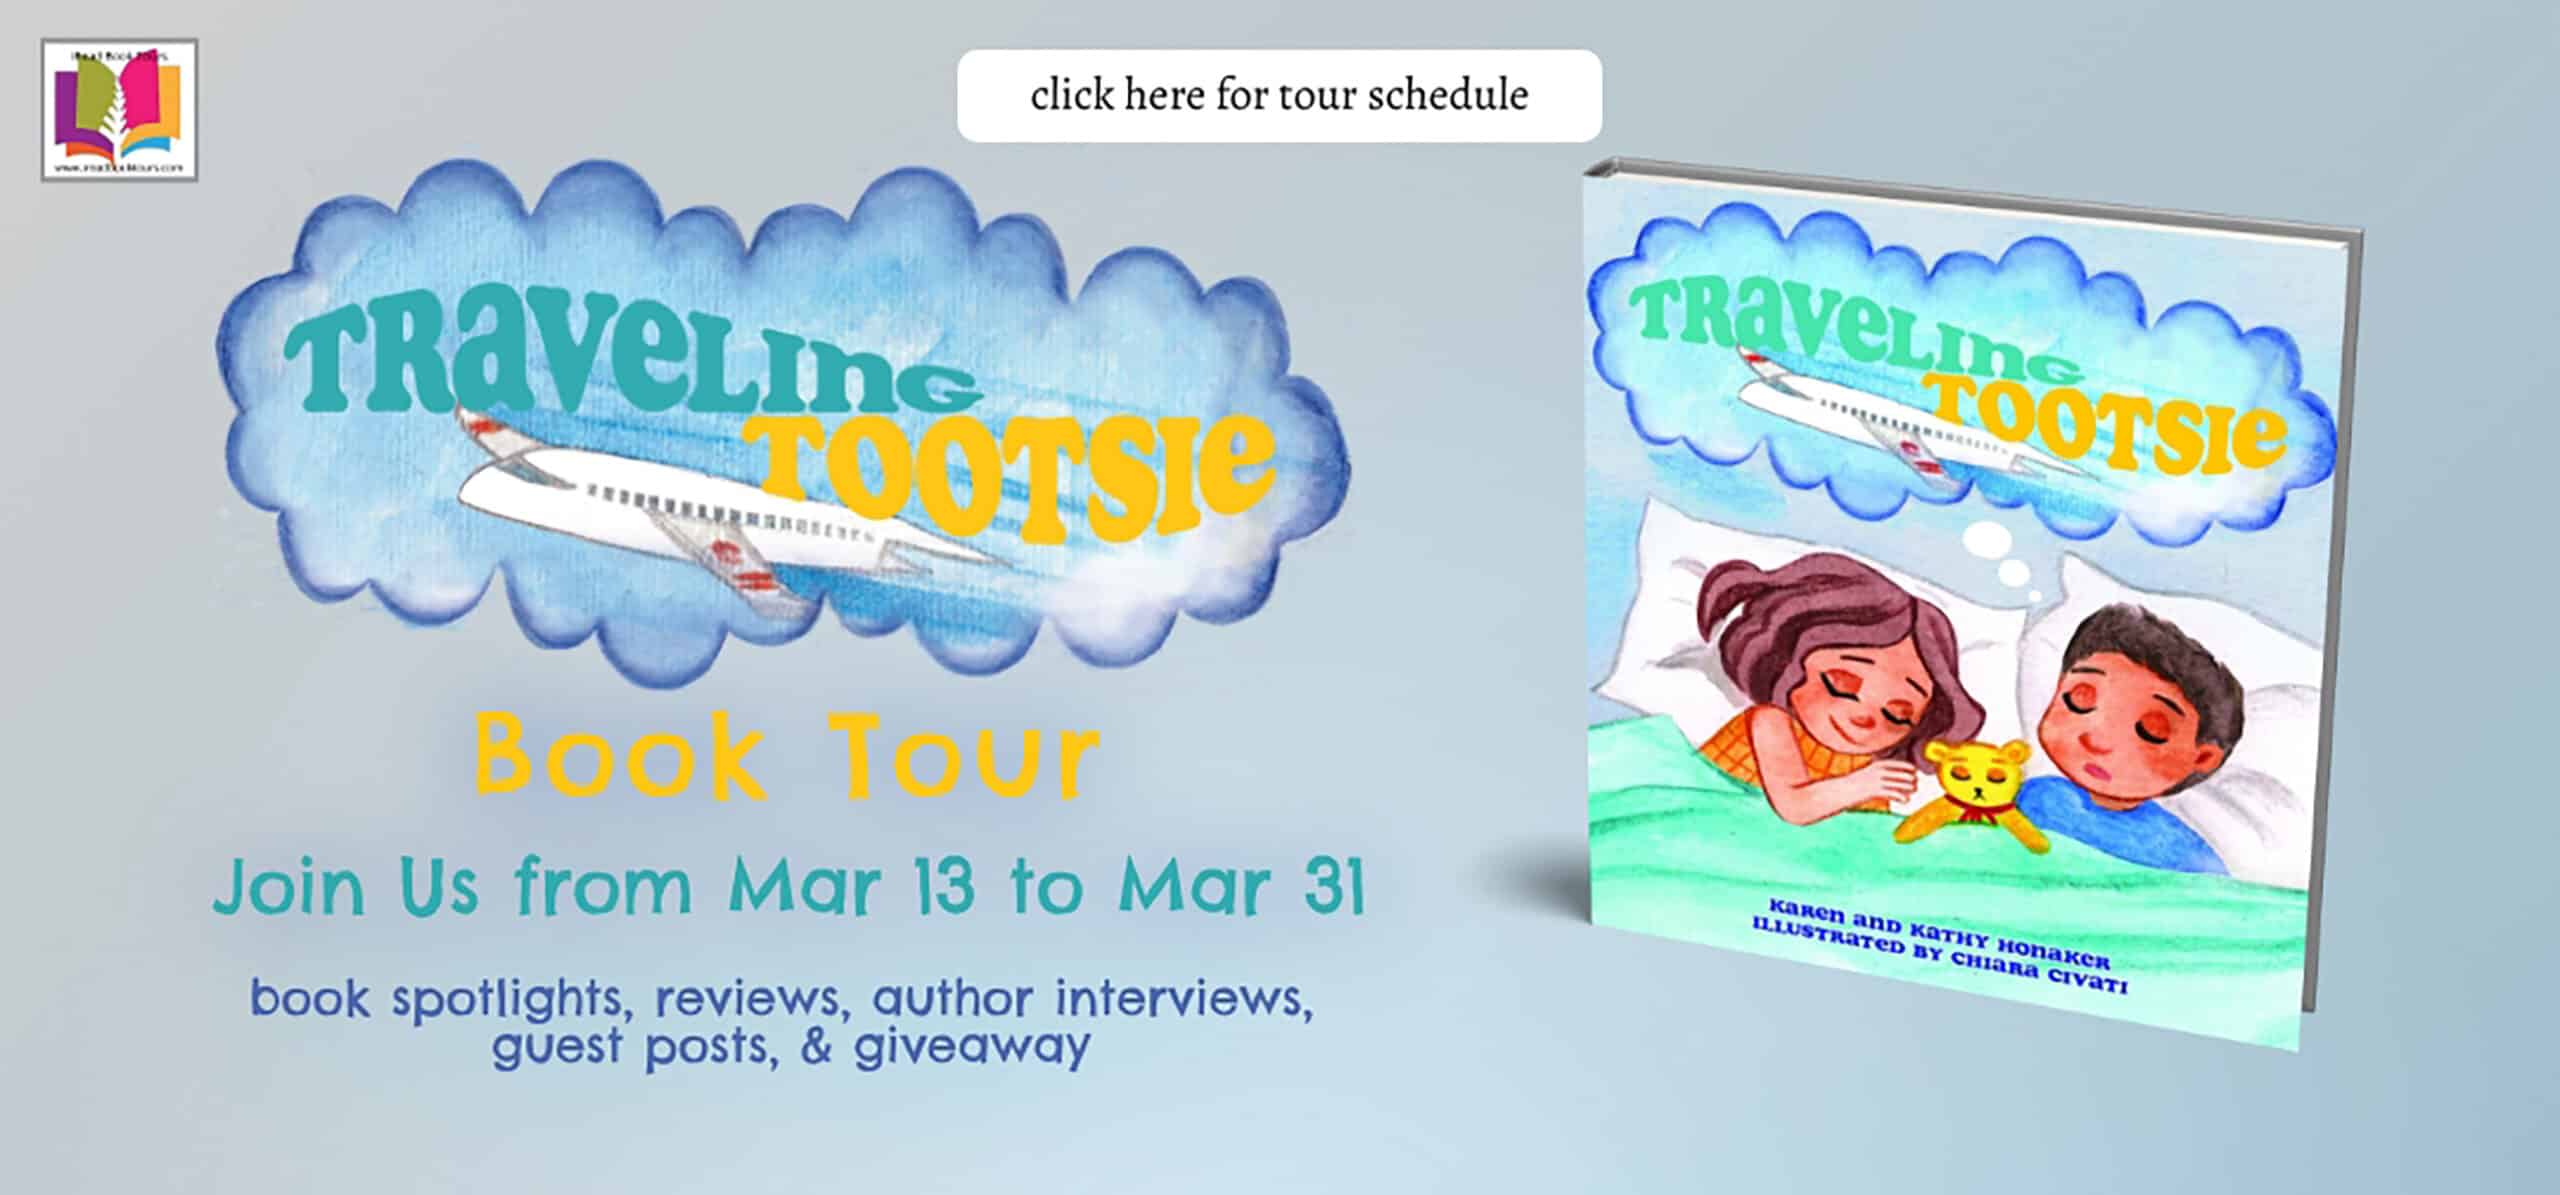 Traveling Tootsie by Karen and Kathy Honaker | 5-Star Children's Book Review | Guest Post from the Authors